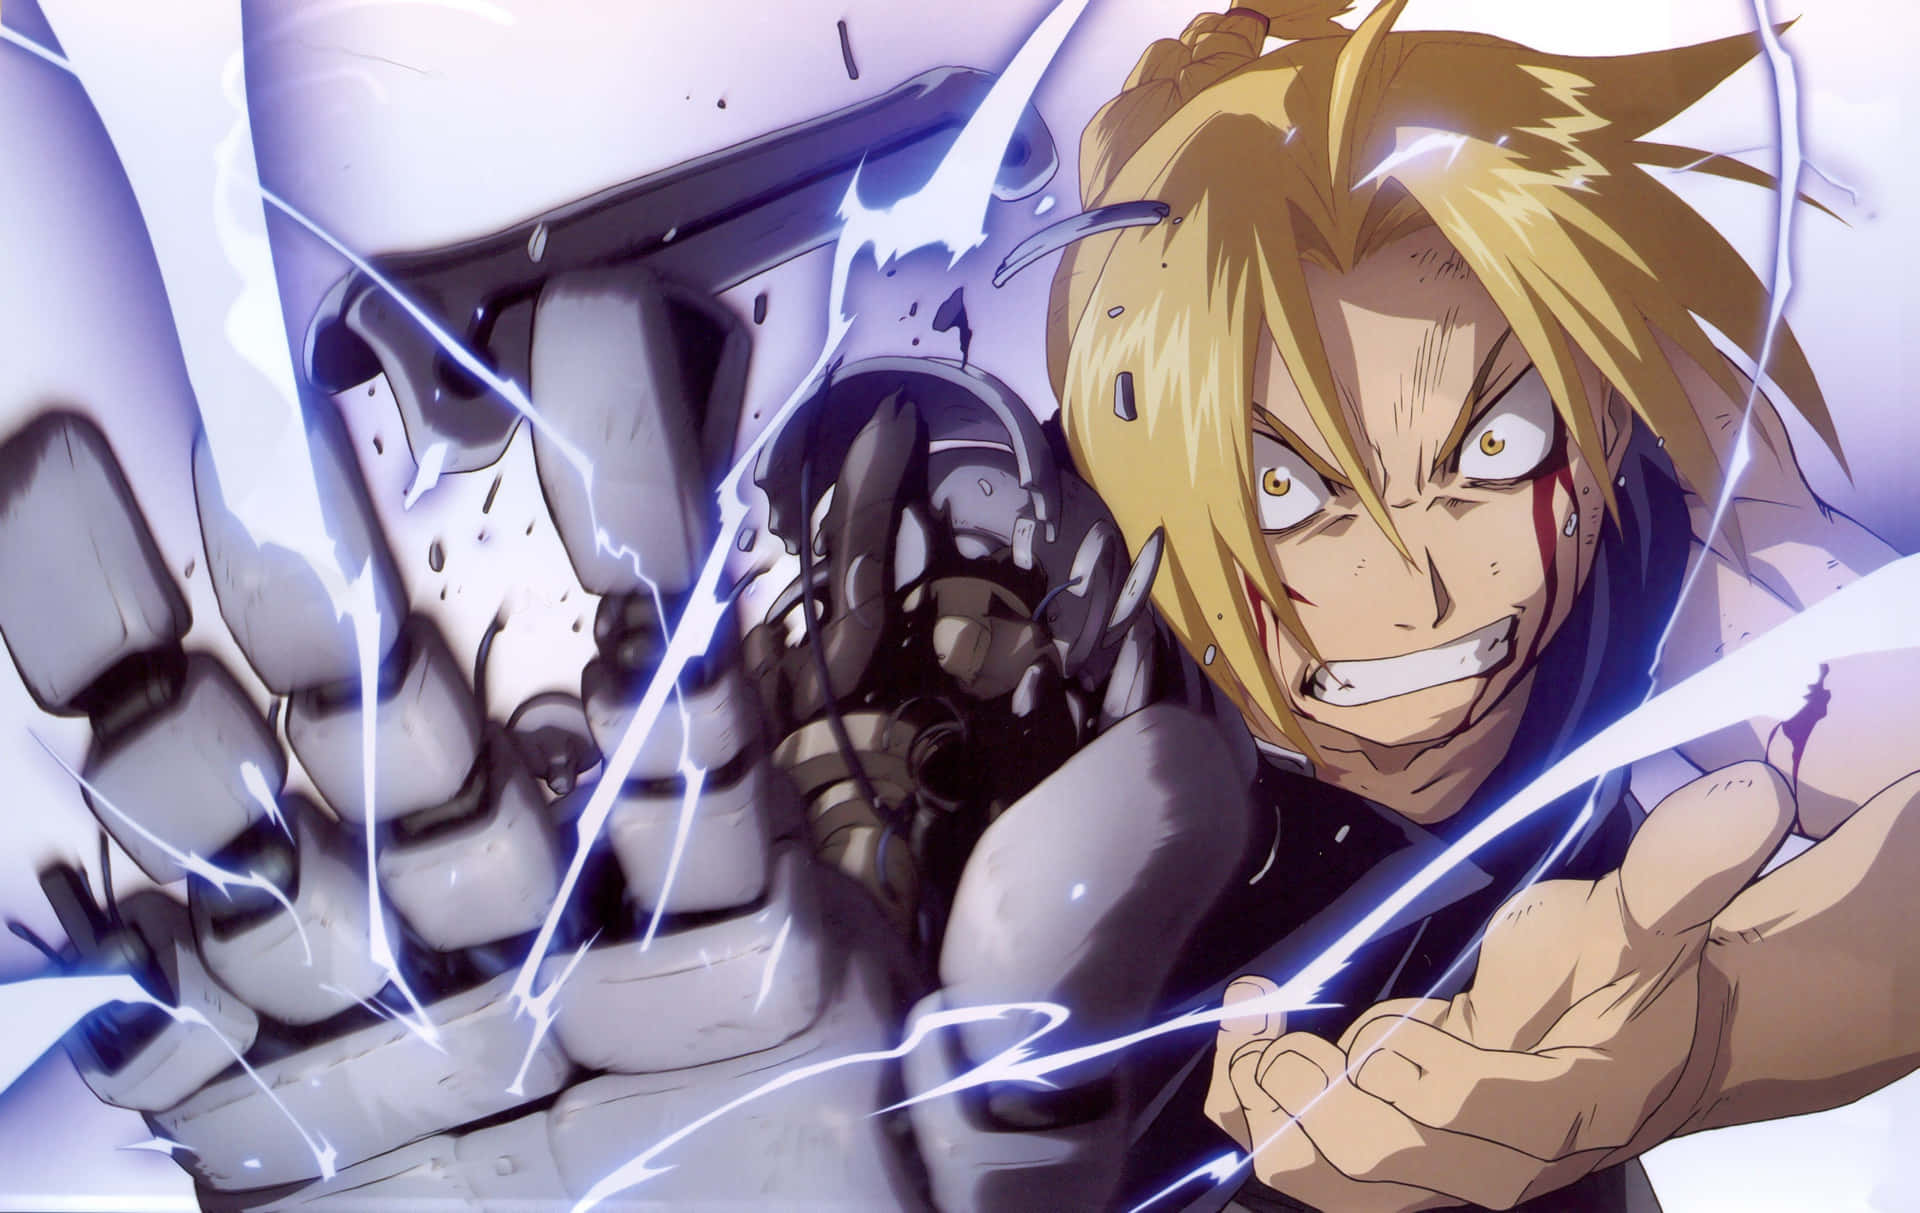 Just Finished FMA Brotherhood! What an epic show! Take a trip down